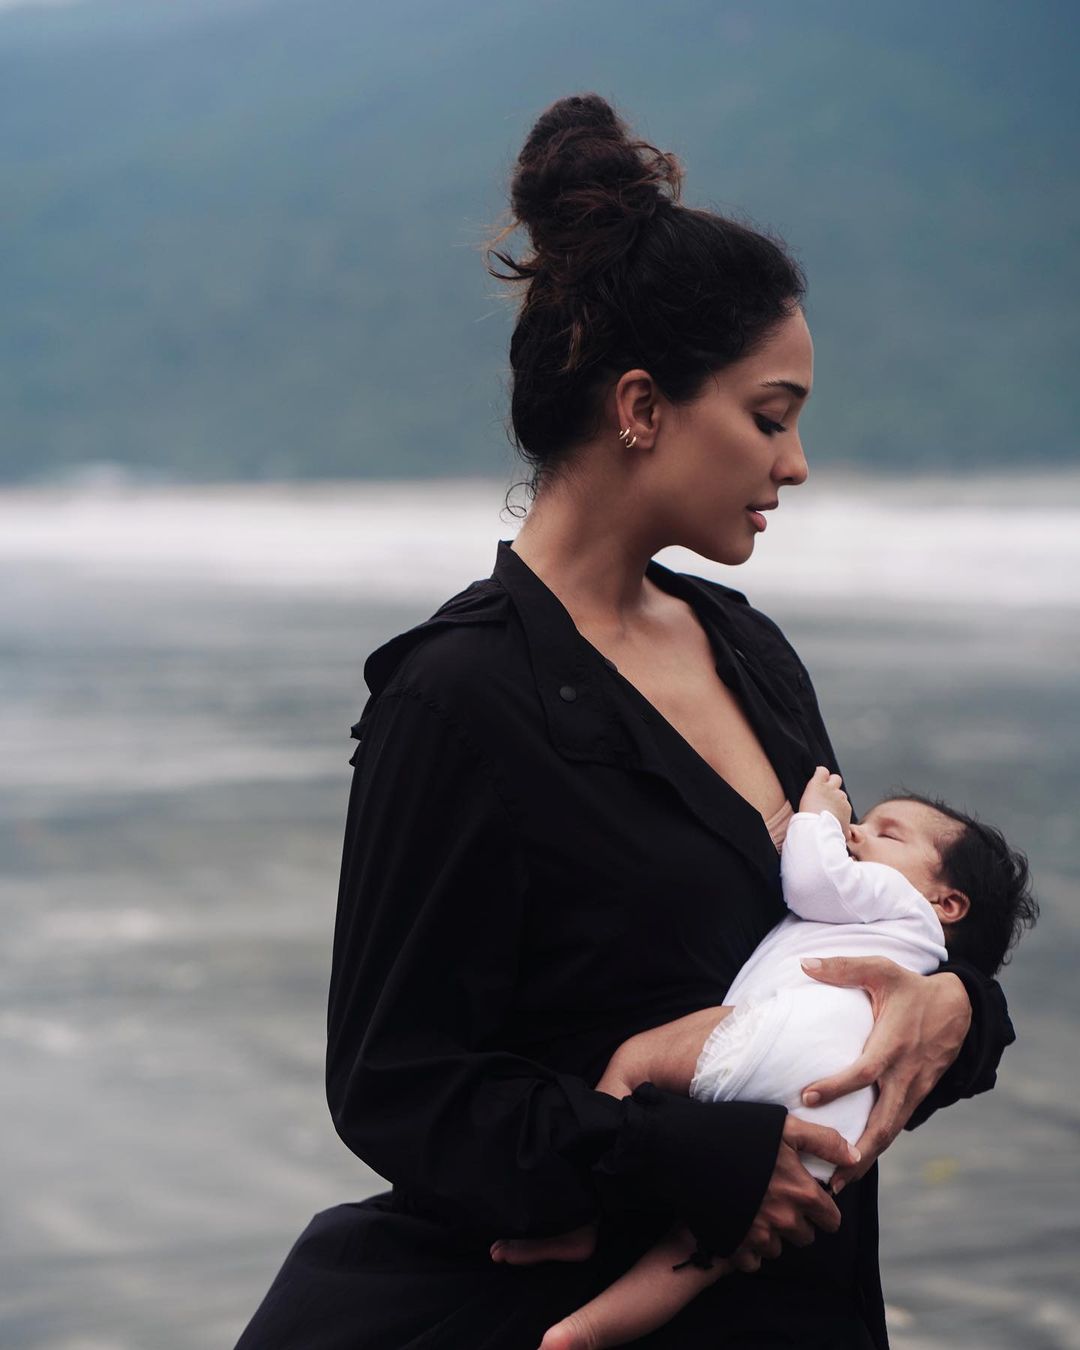 In the click, Lisa can be seen breastfeeding her baby (Photo: Instagram) 